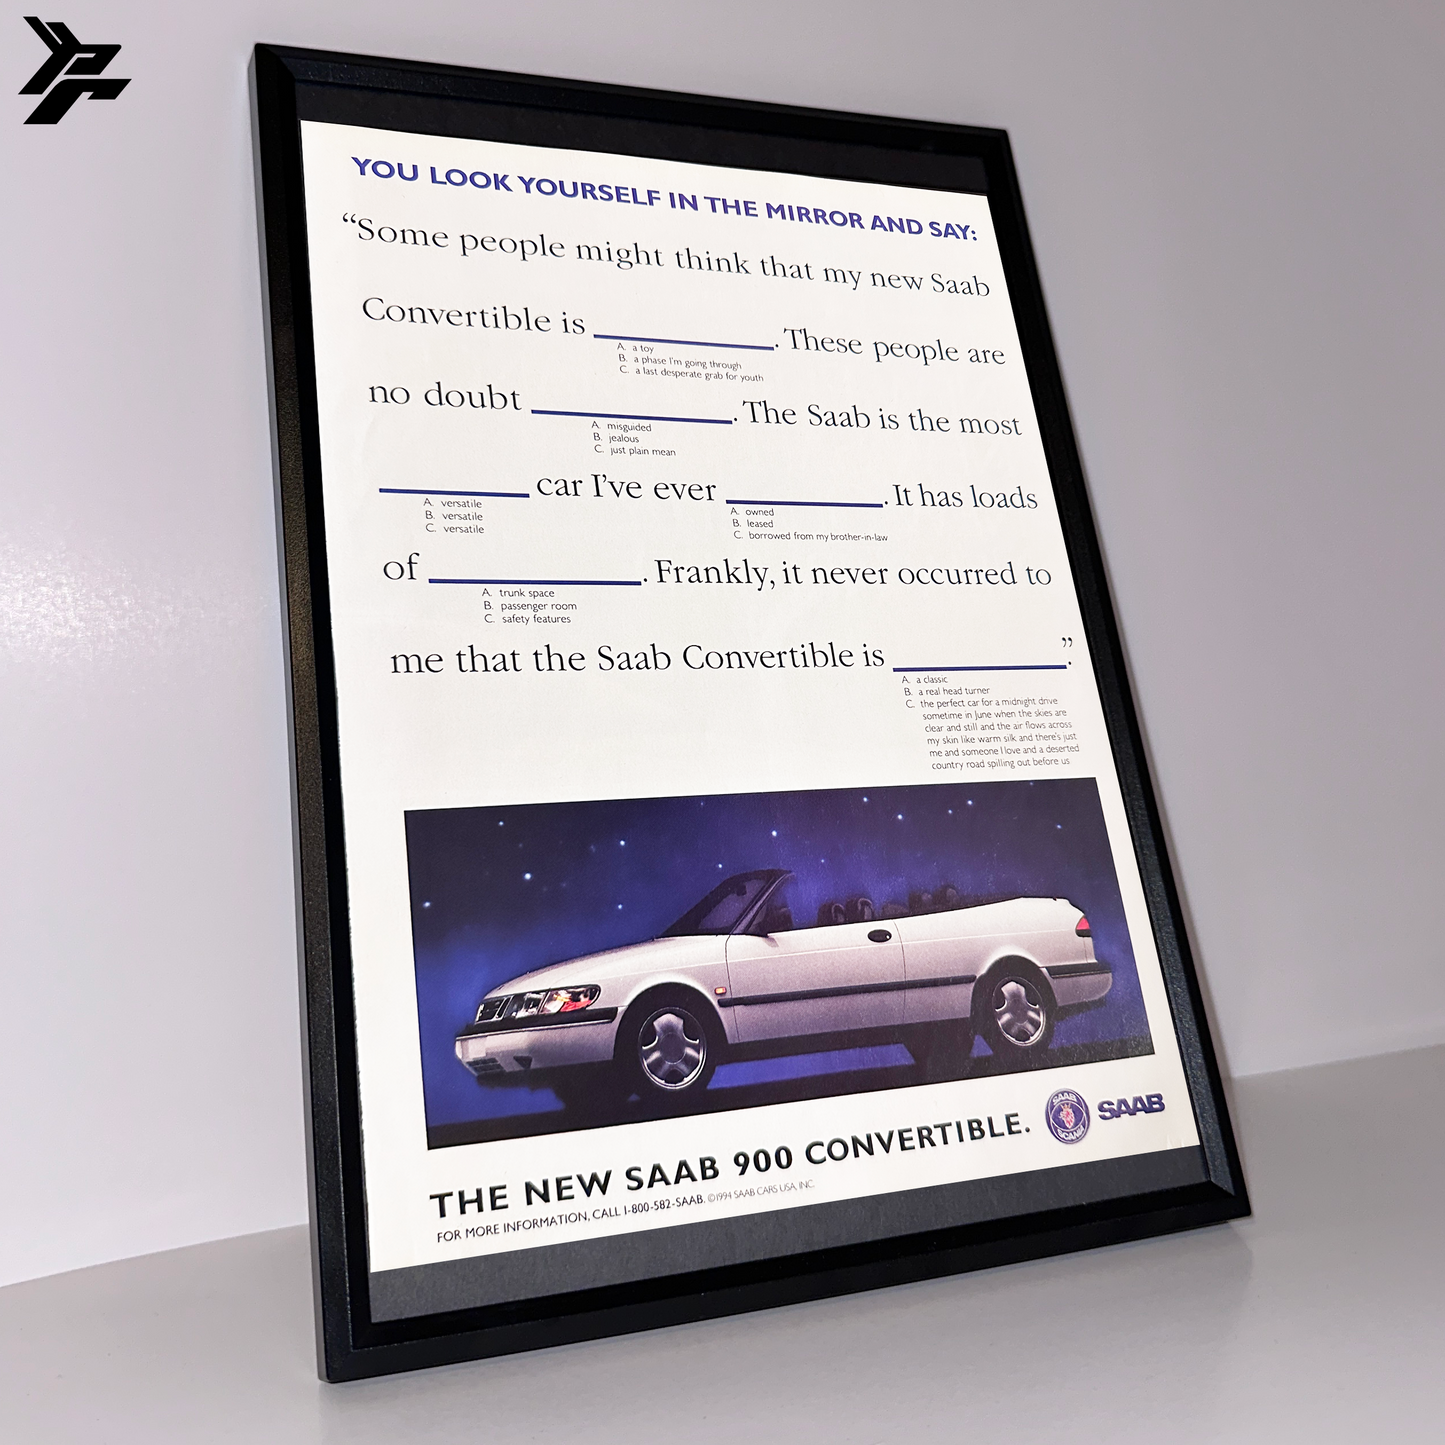 The new Saab 900 convertible framed ad